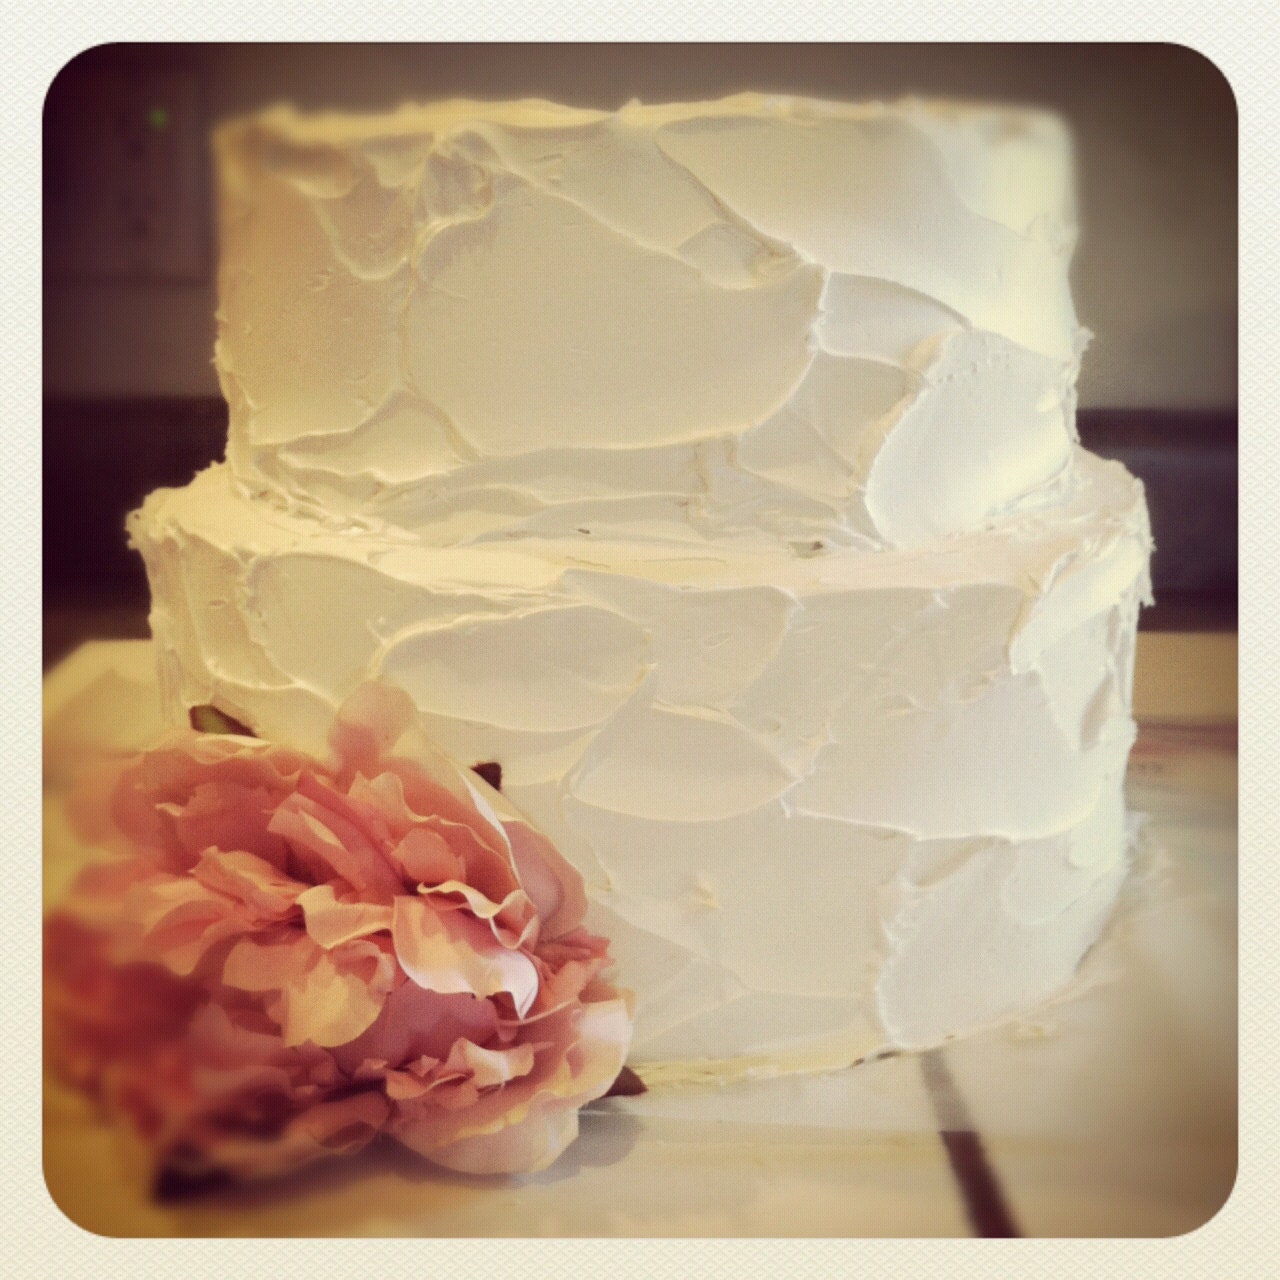 Made to order fake cakes-Great addition to your Wedding decor, Birthday decor, mothers day. or photo prop